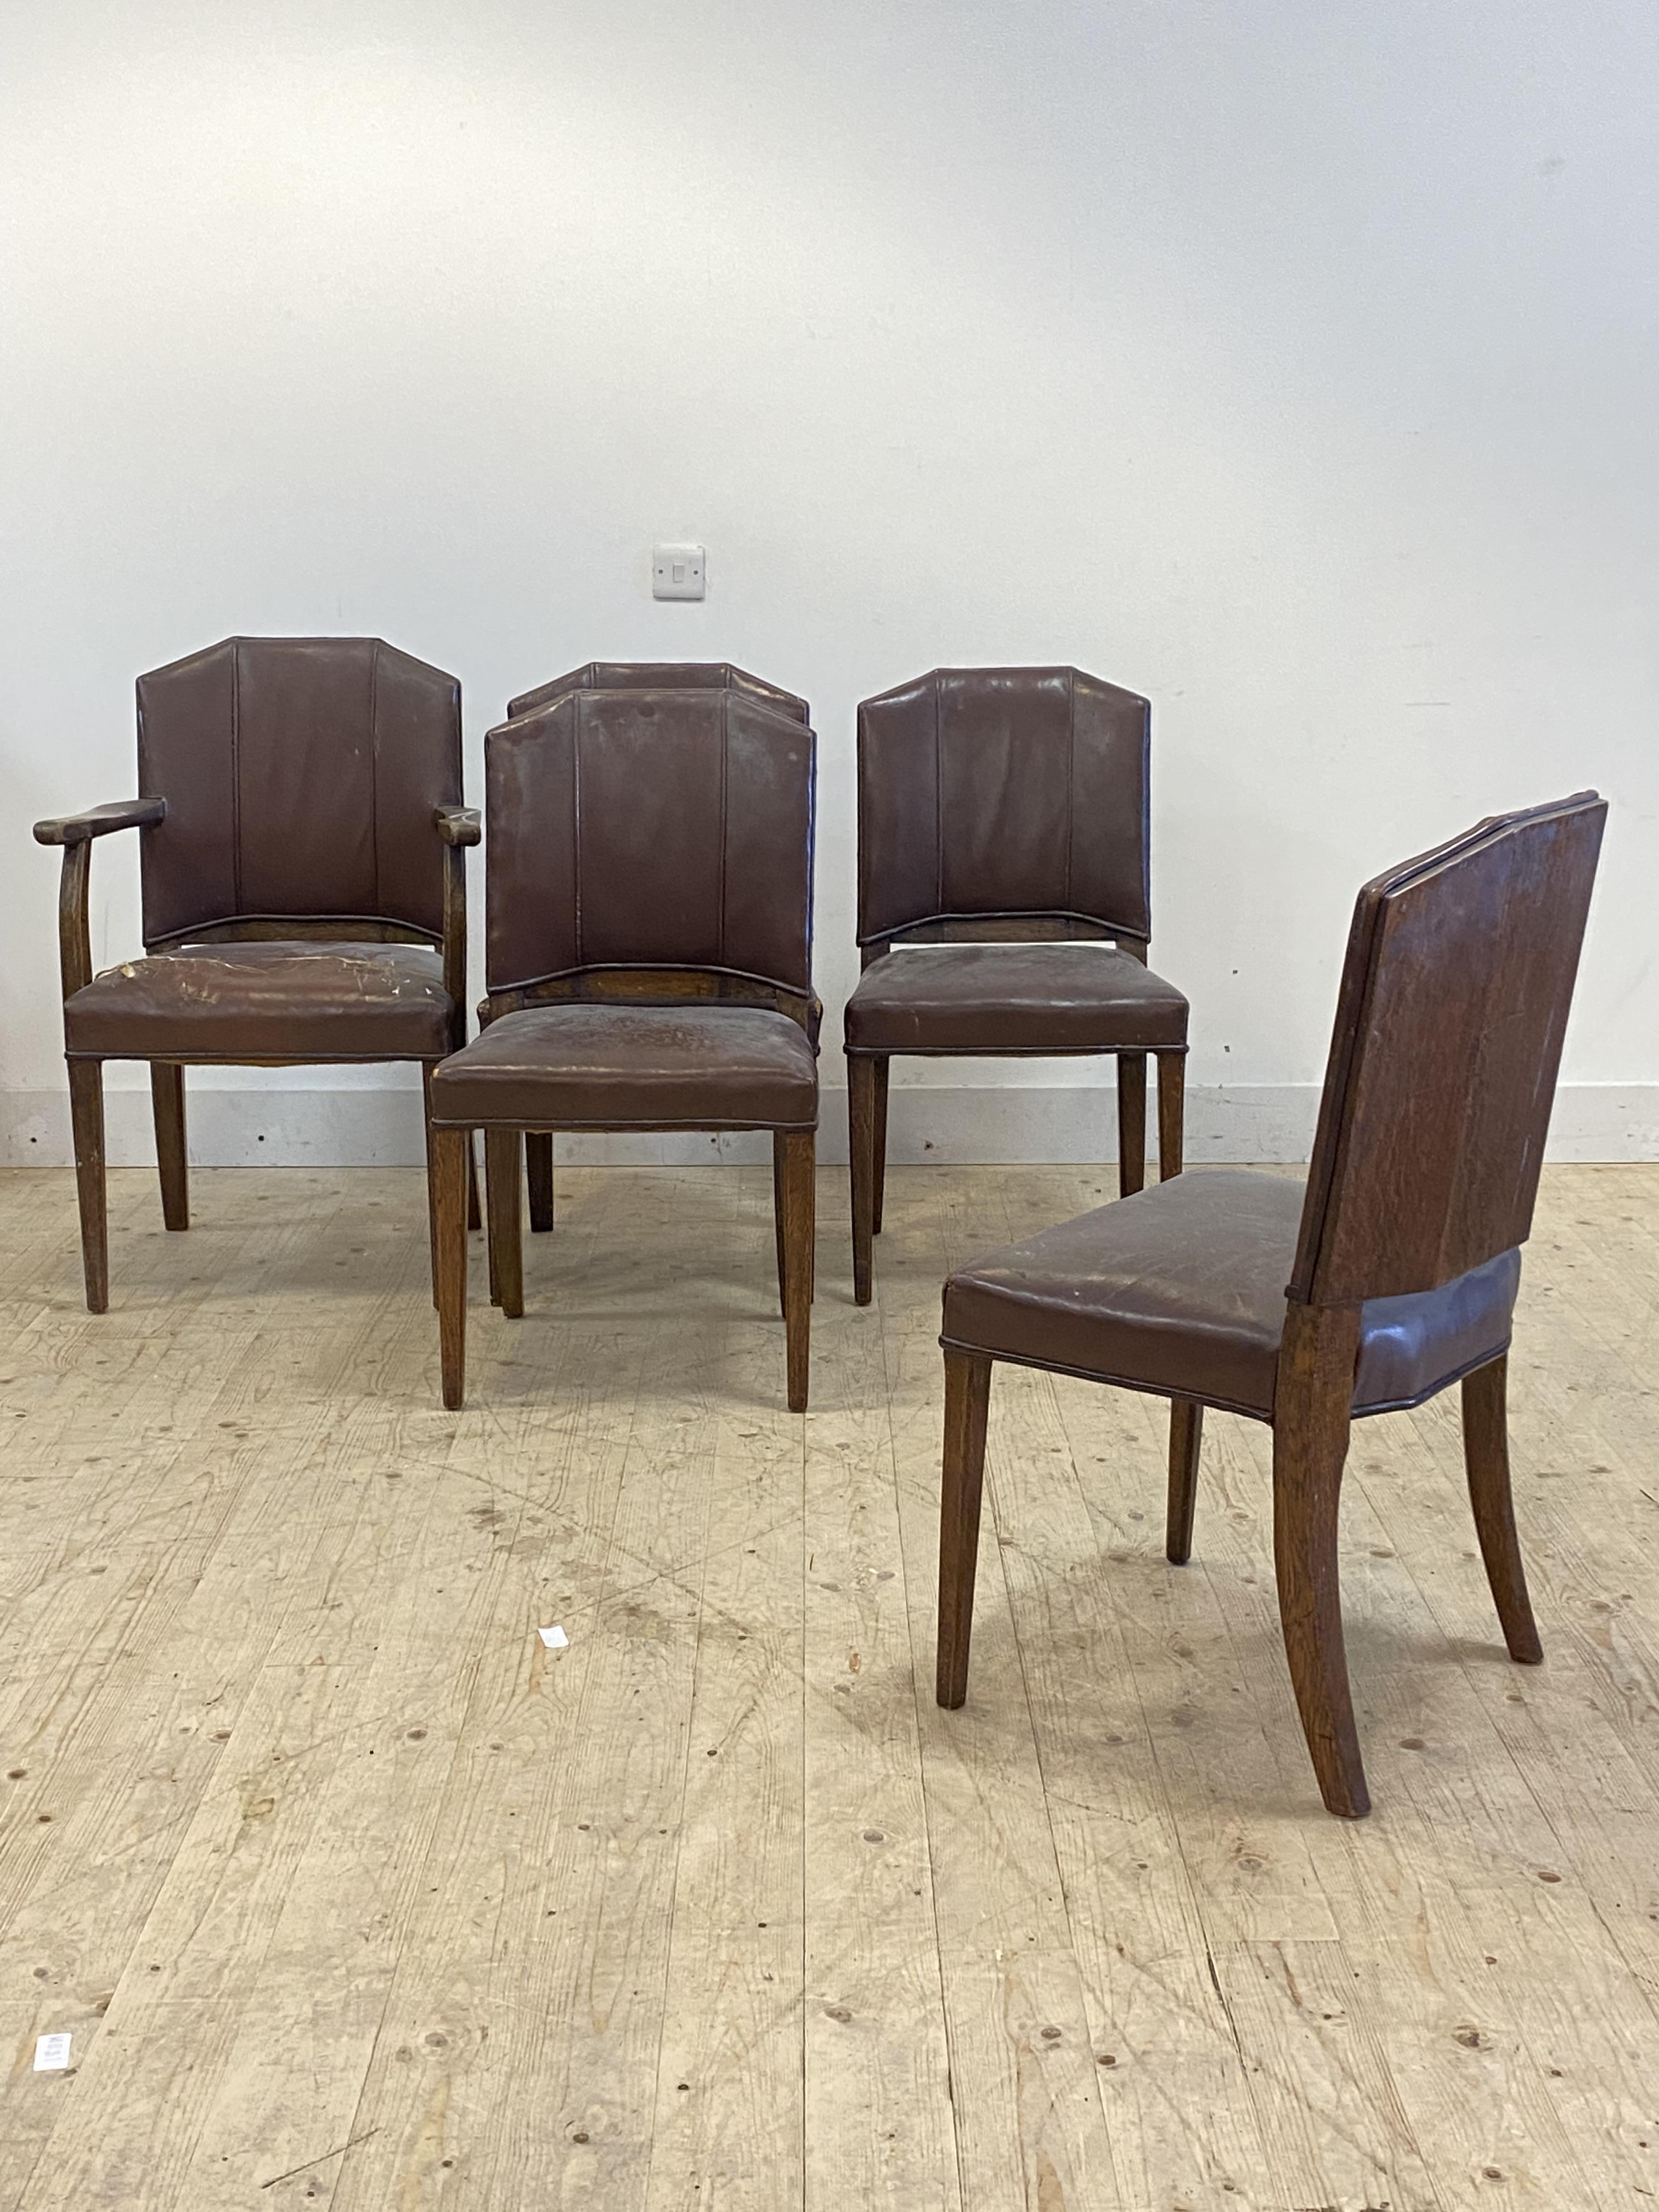 A set of five (4+1) leather upholstered dining chairs, early 20th century, H96cm, W64cm, D50cm - Image 3 of 3